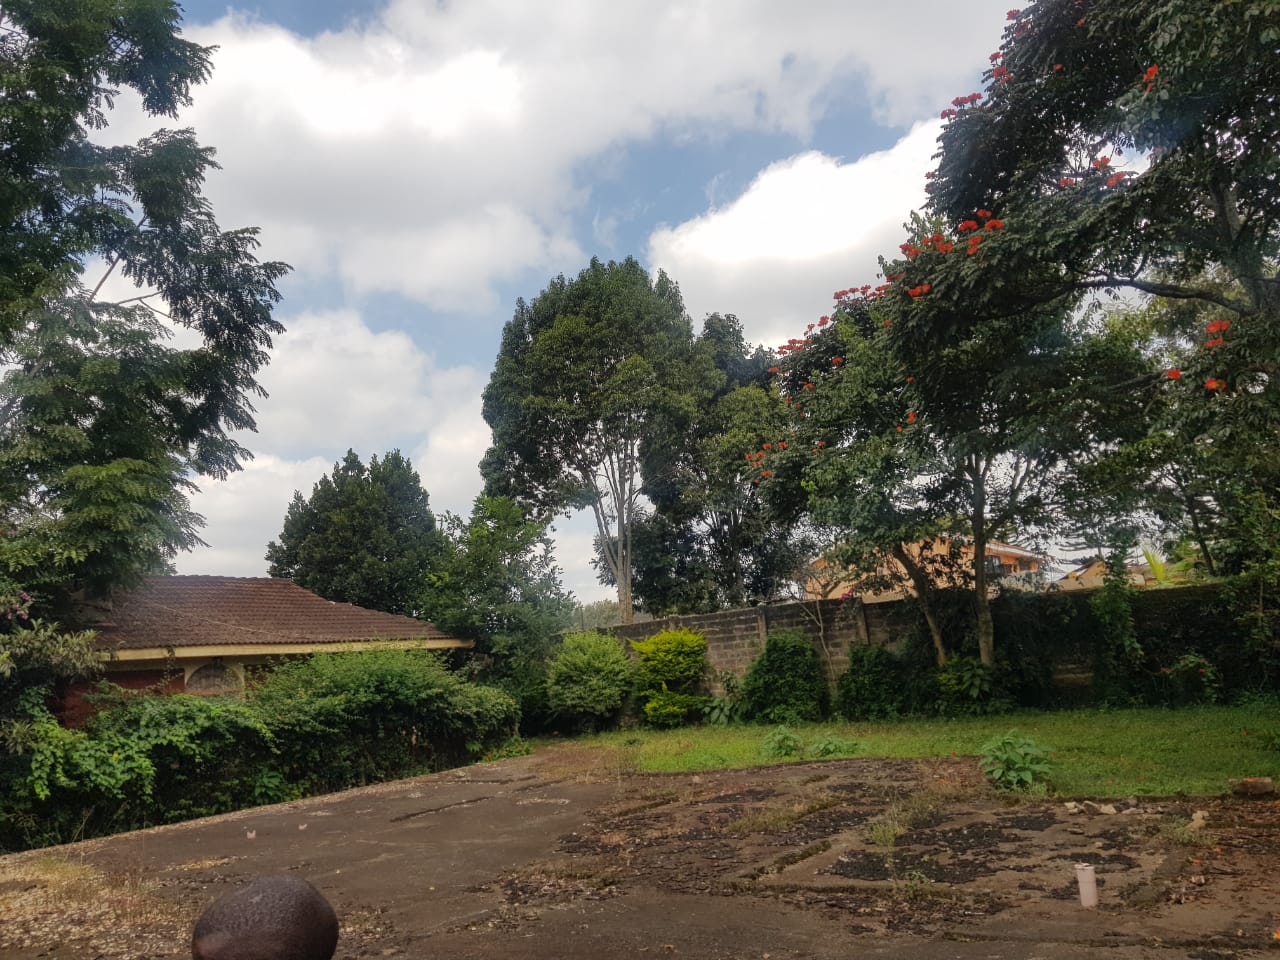 Kitisuru half acre Land For sale with 2 bedroom house and 3300 sq ft Foundation plus basement @50M ONLY Wow